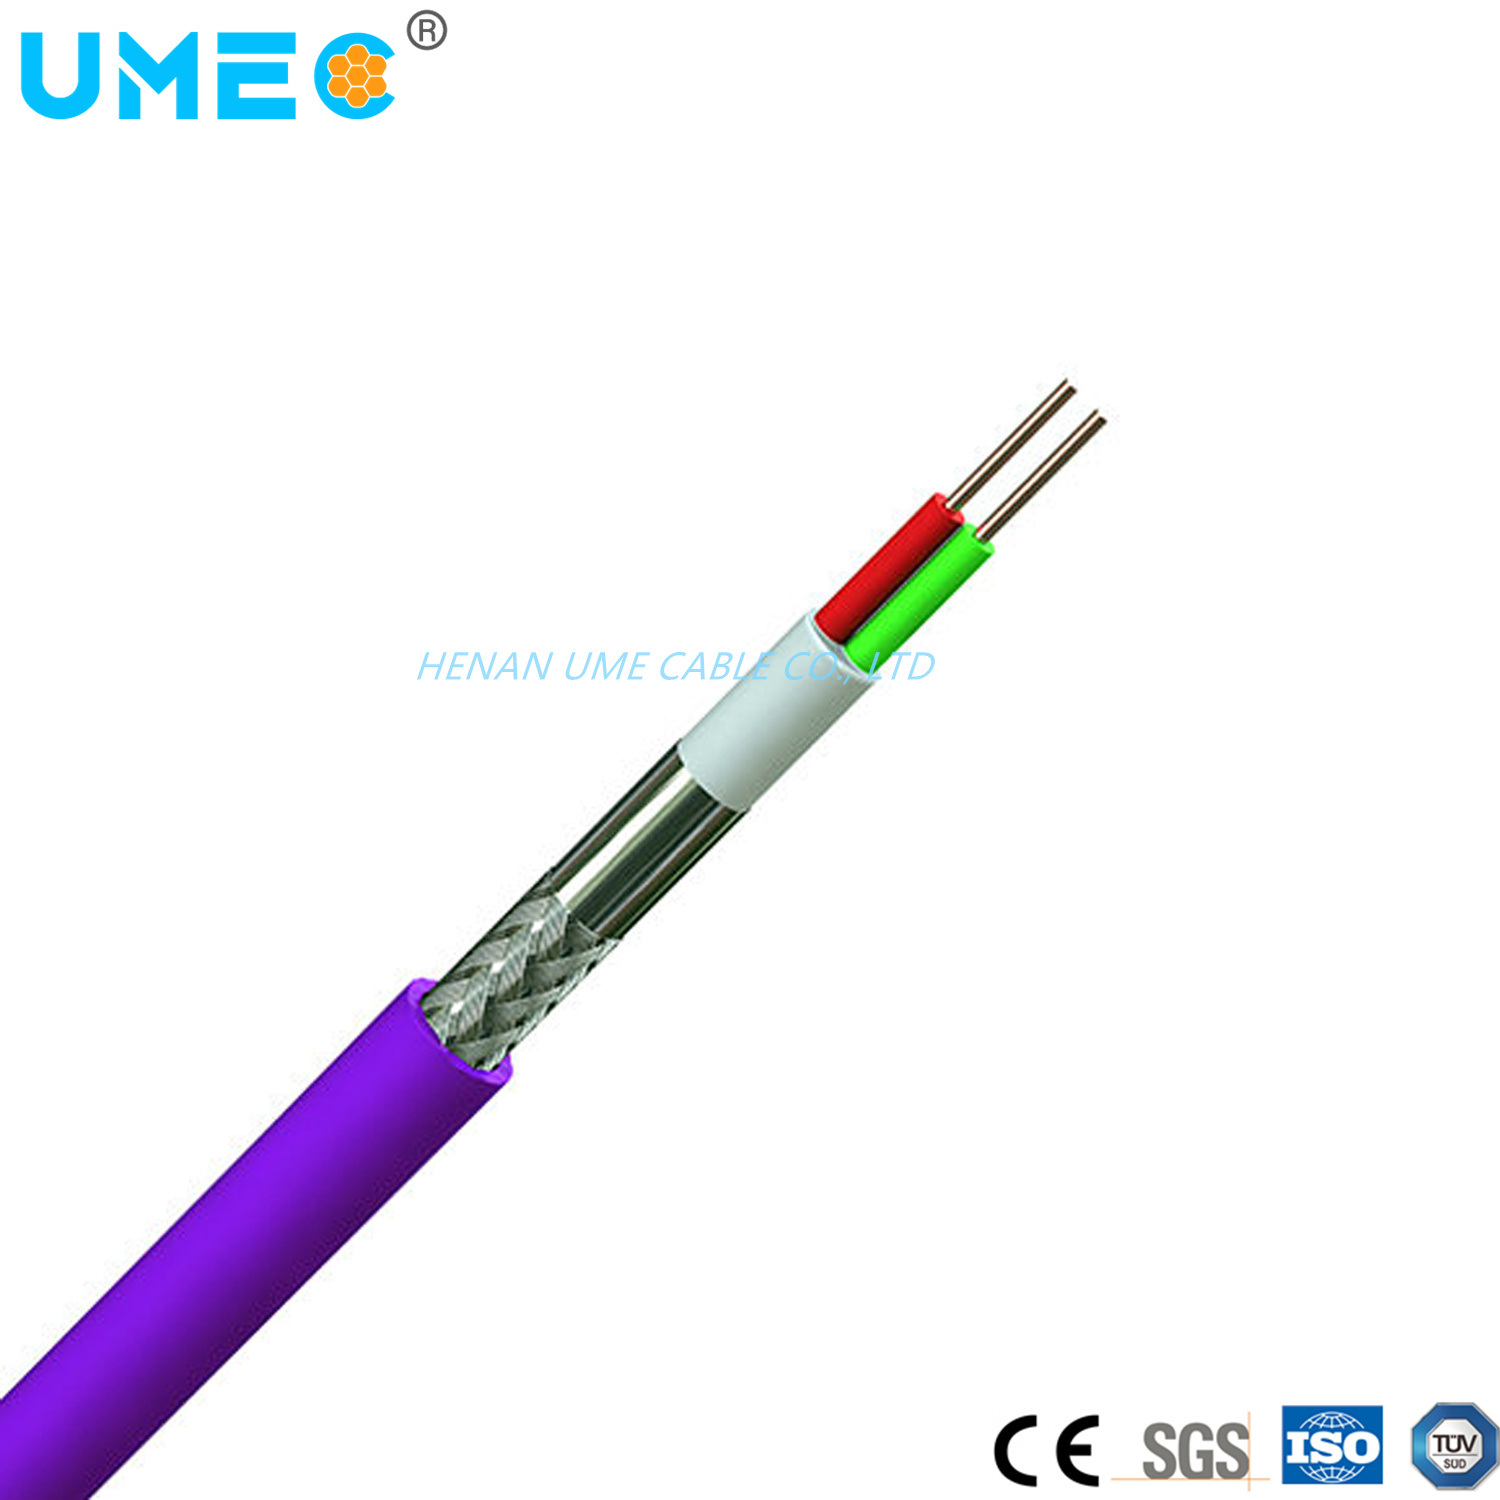 Low Voltage Copper Conductor 6xv1830-0eh10 Cable Industrial Electrical Cable